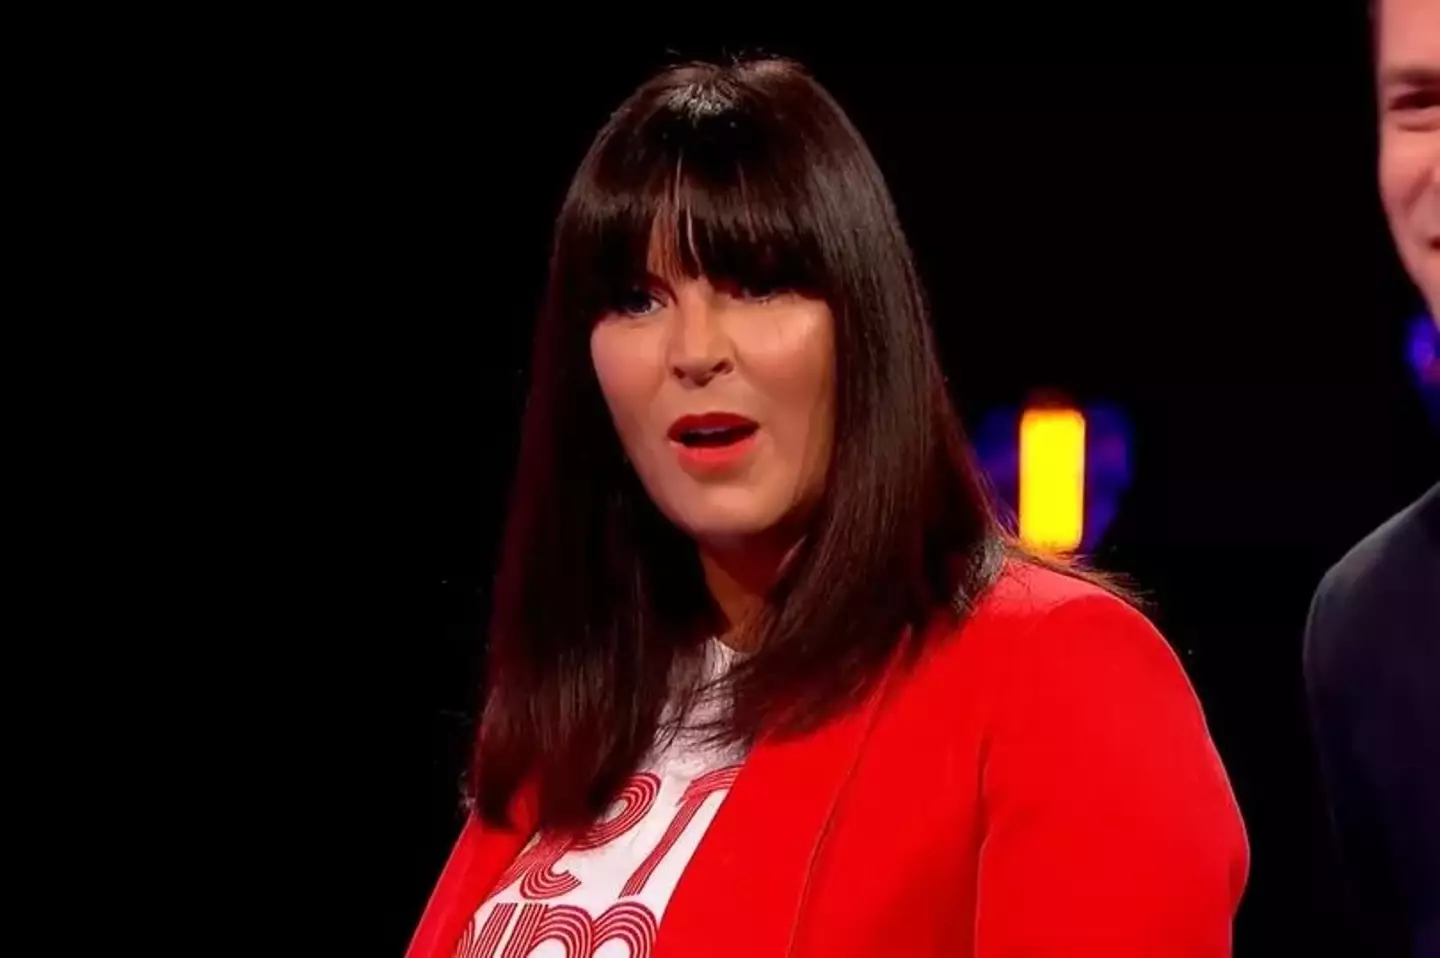 Anna Richardson appeared to find the situation amusing. (Channel 4)